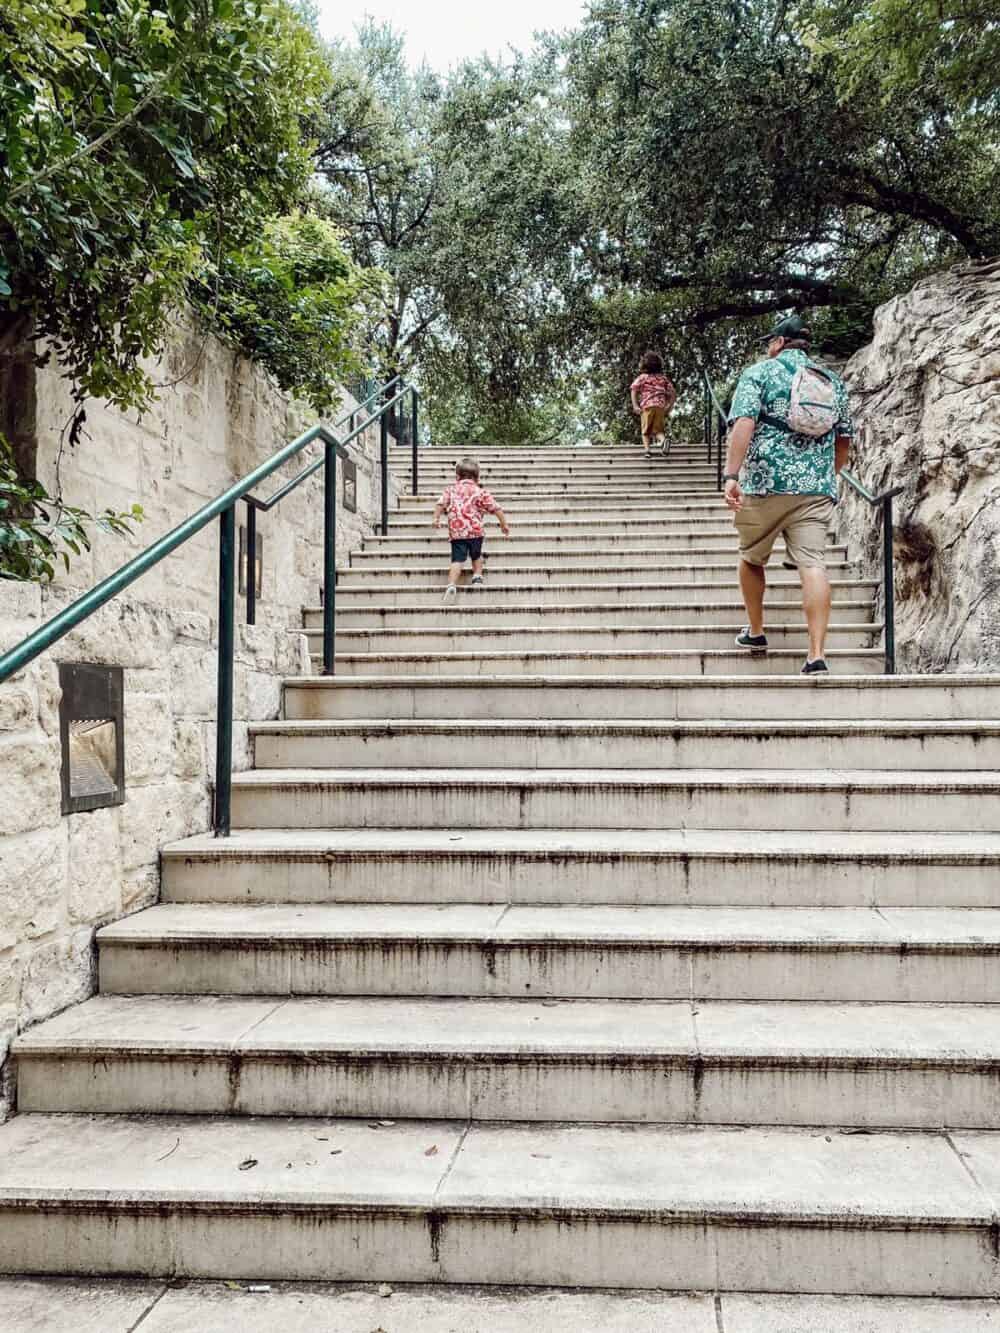 father and two young boys walking up a staircase at the SAn ANtonio riverwalk